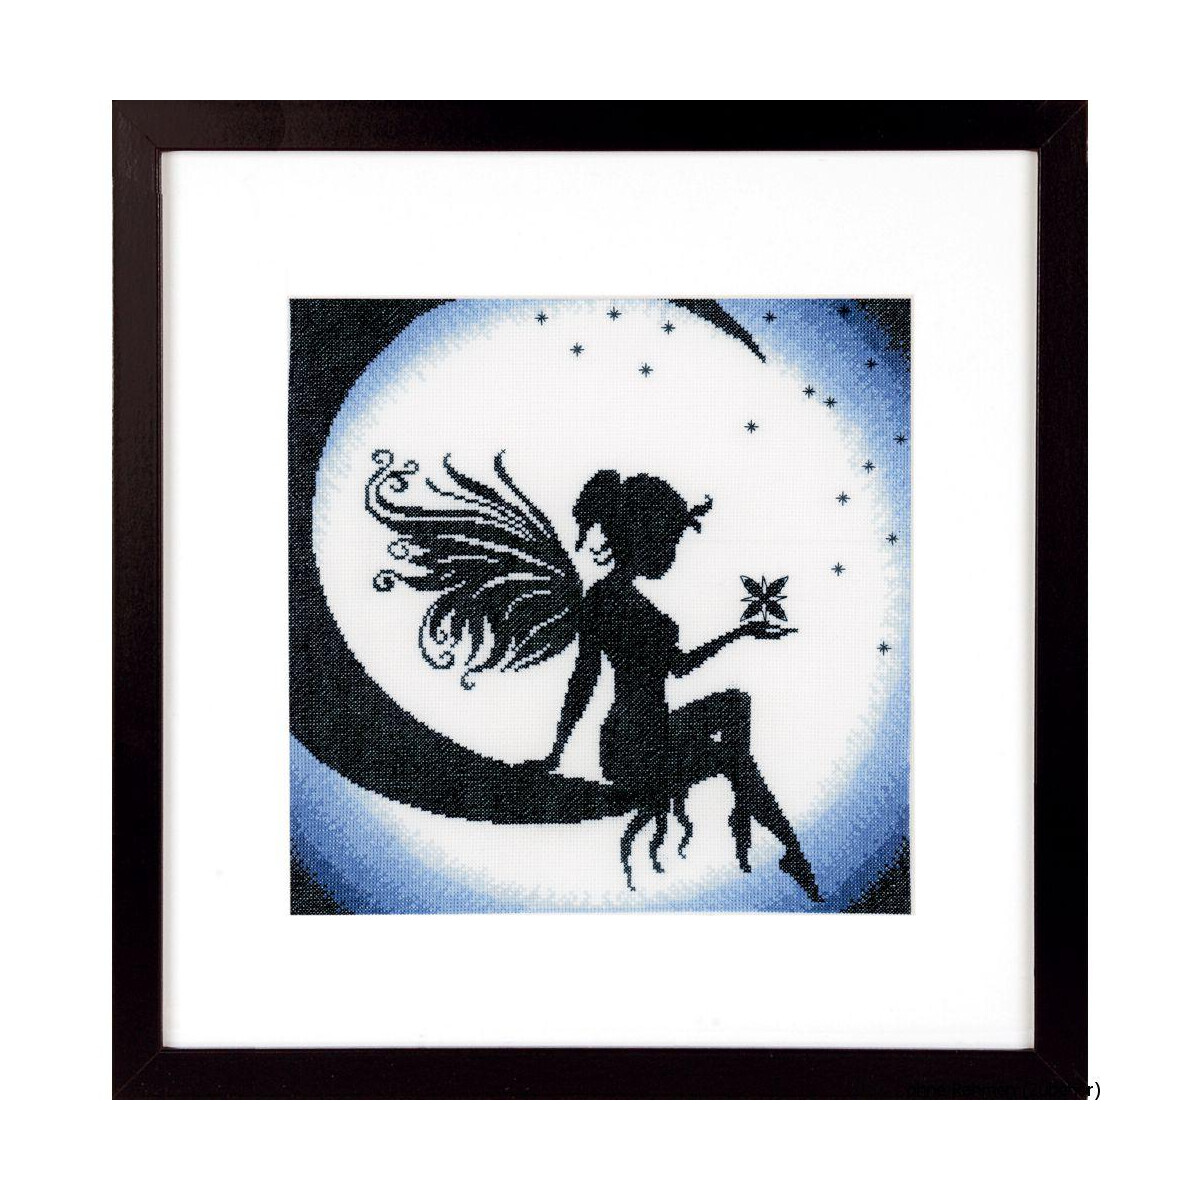 A framed work of art showing a fairy in silhouette with...